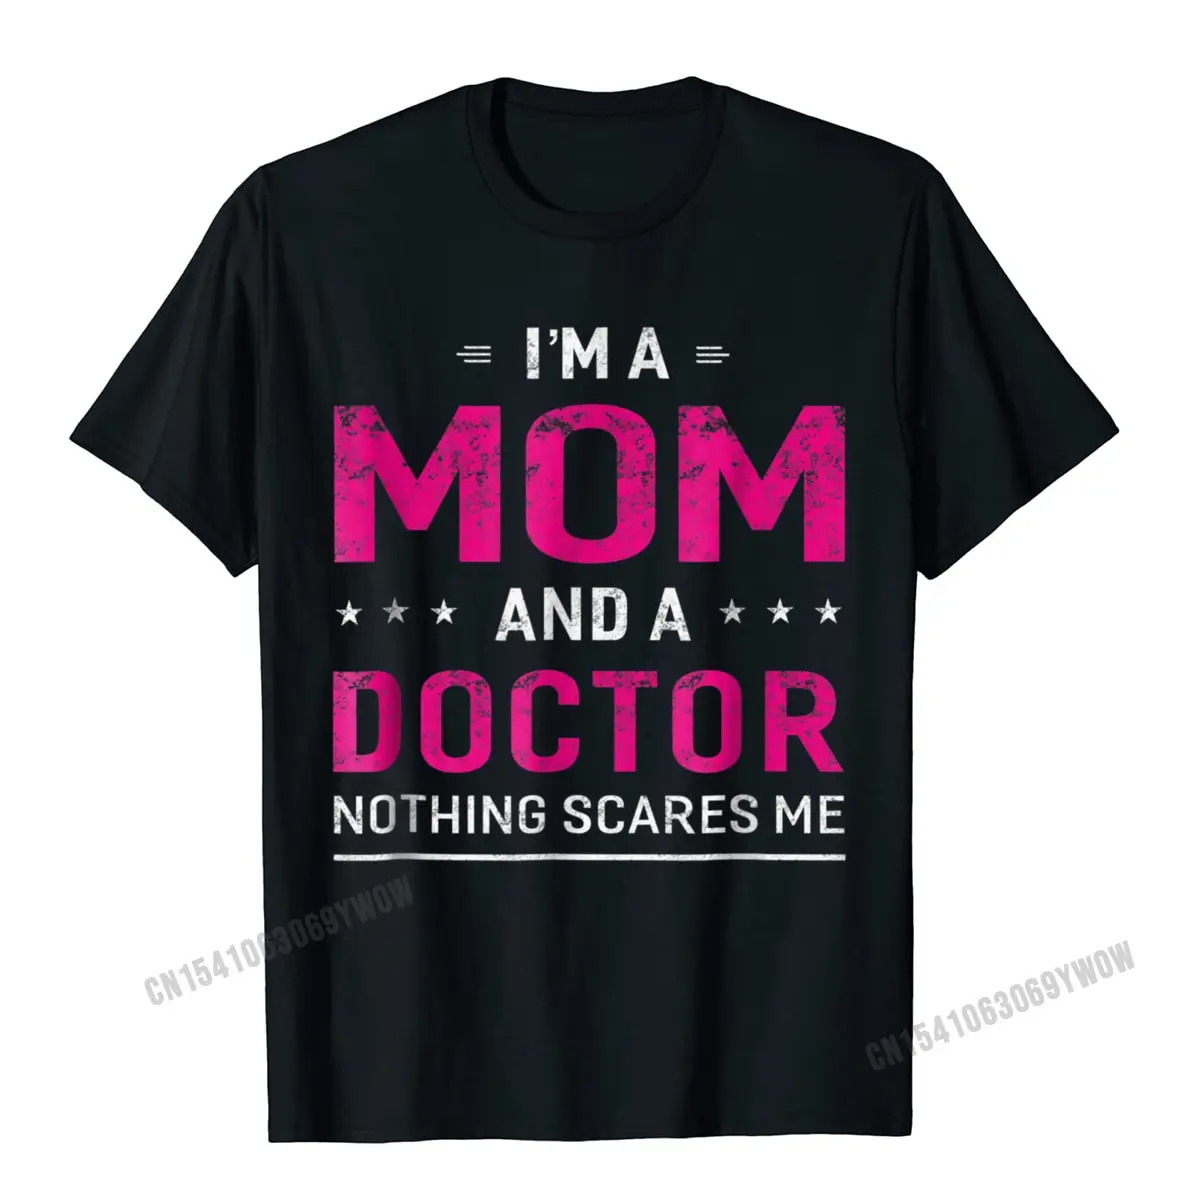 

Im A Mom And Doctor T-Shirt For Women Mother Funny Gift Camisas Men Custom Tops Shirts Cotton Man Tshirts Custom Designer